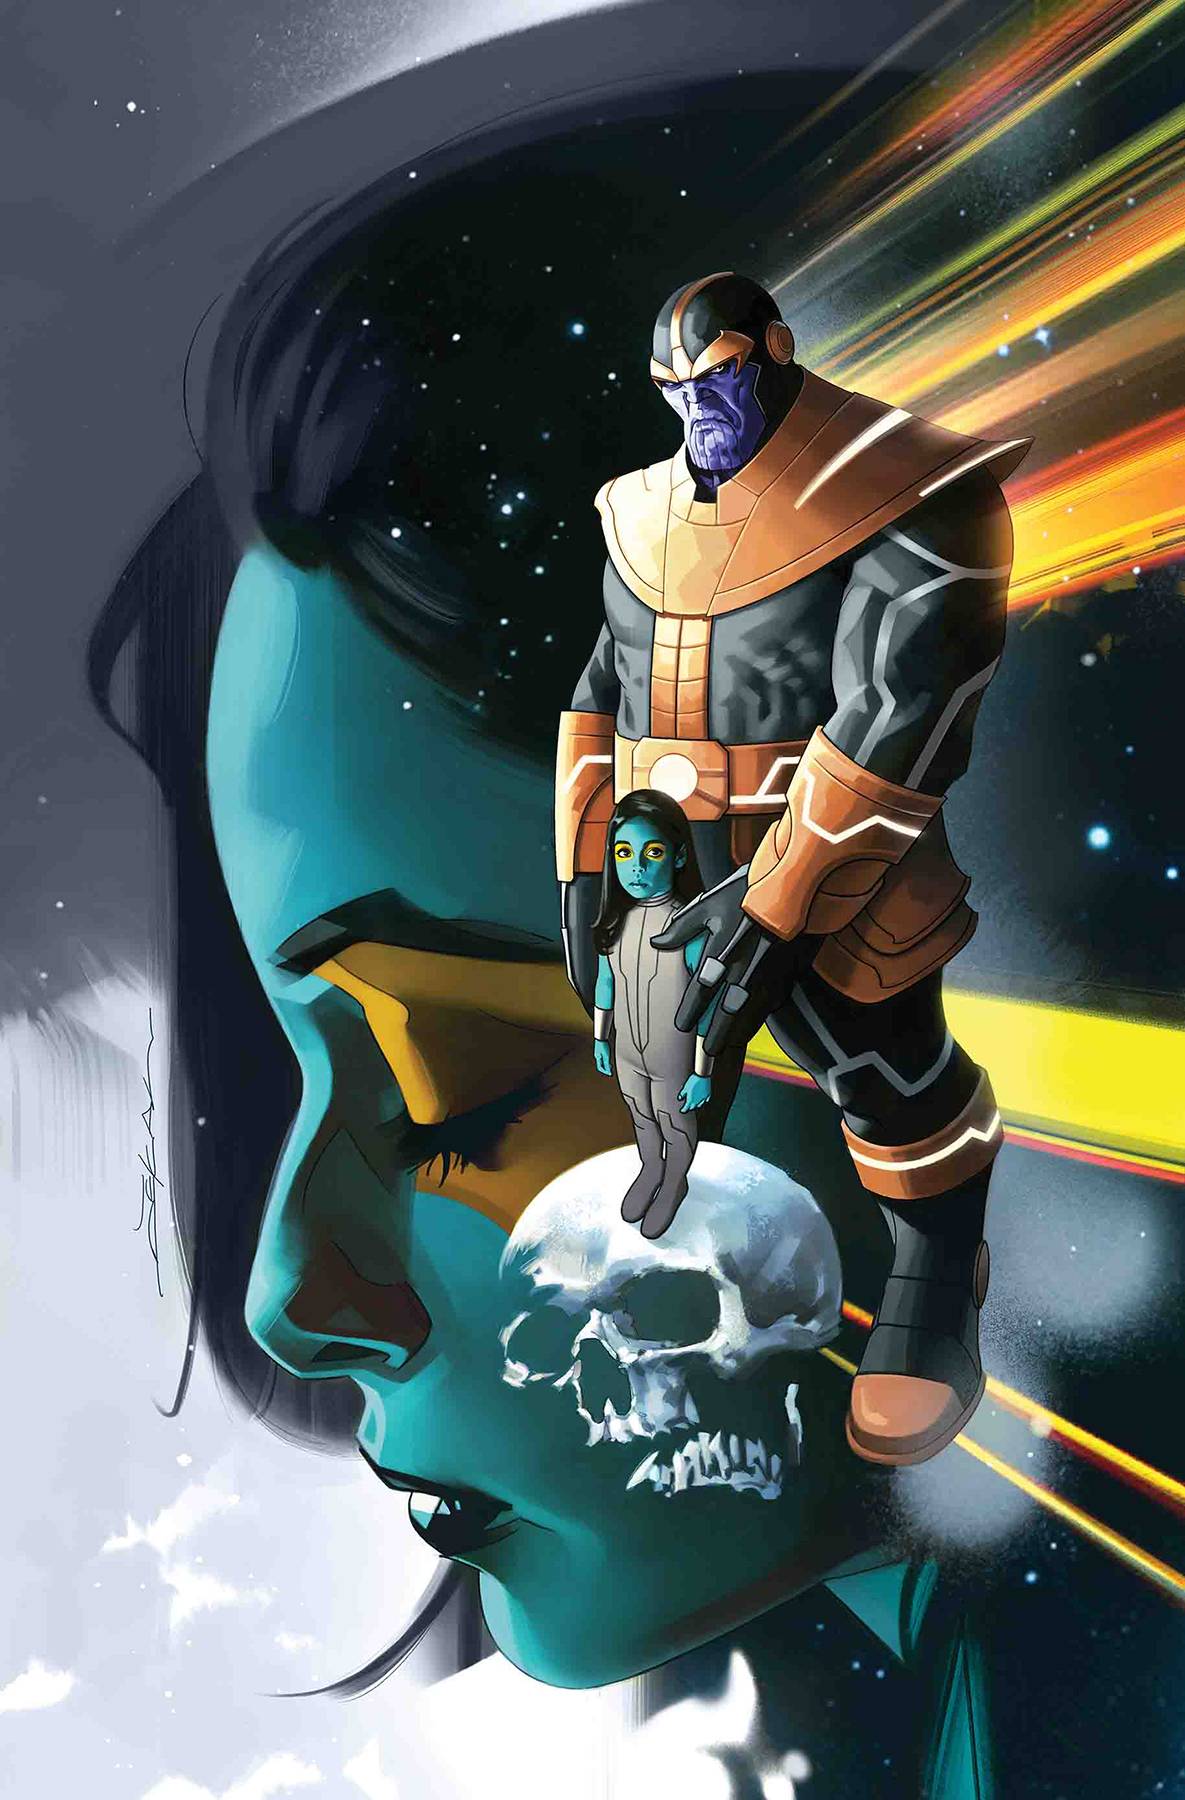 THANOS #1 BY DEKAL POSTER